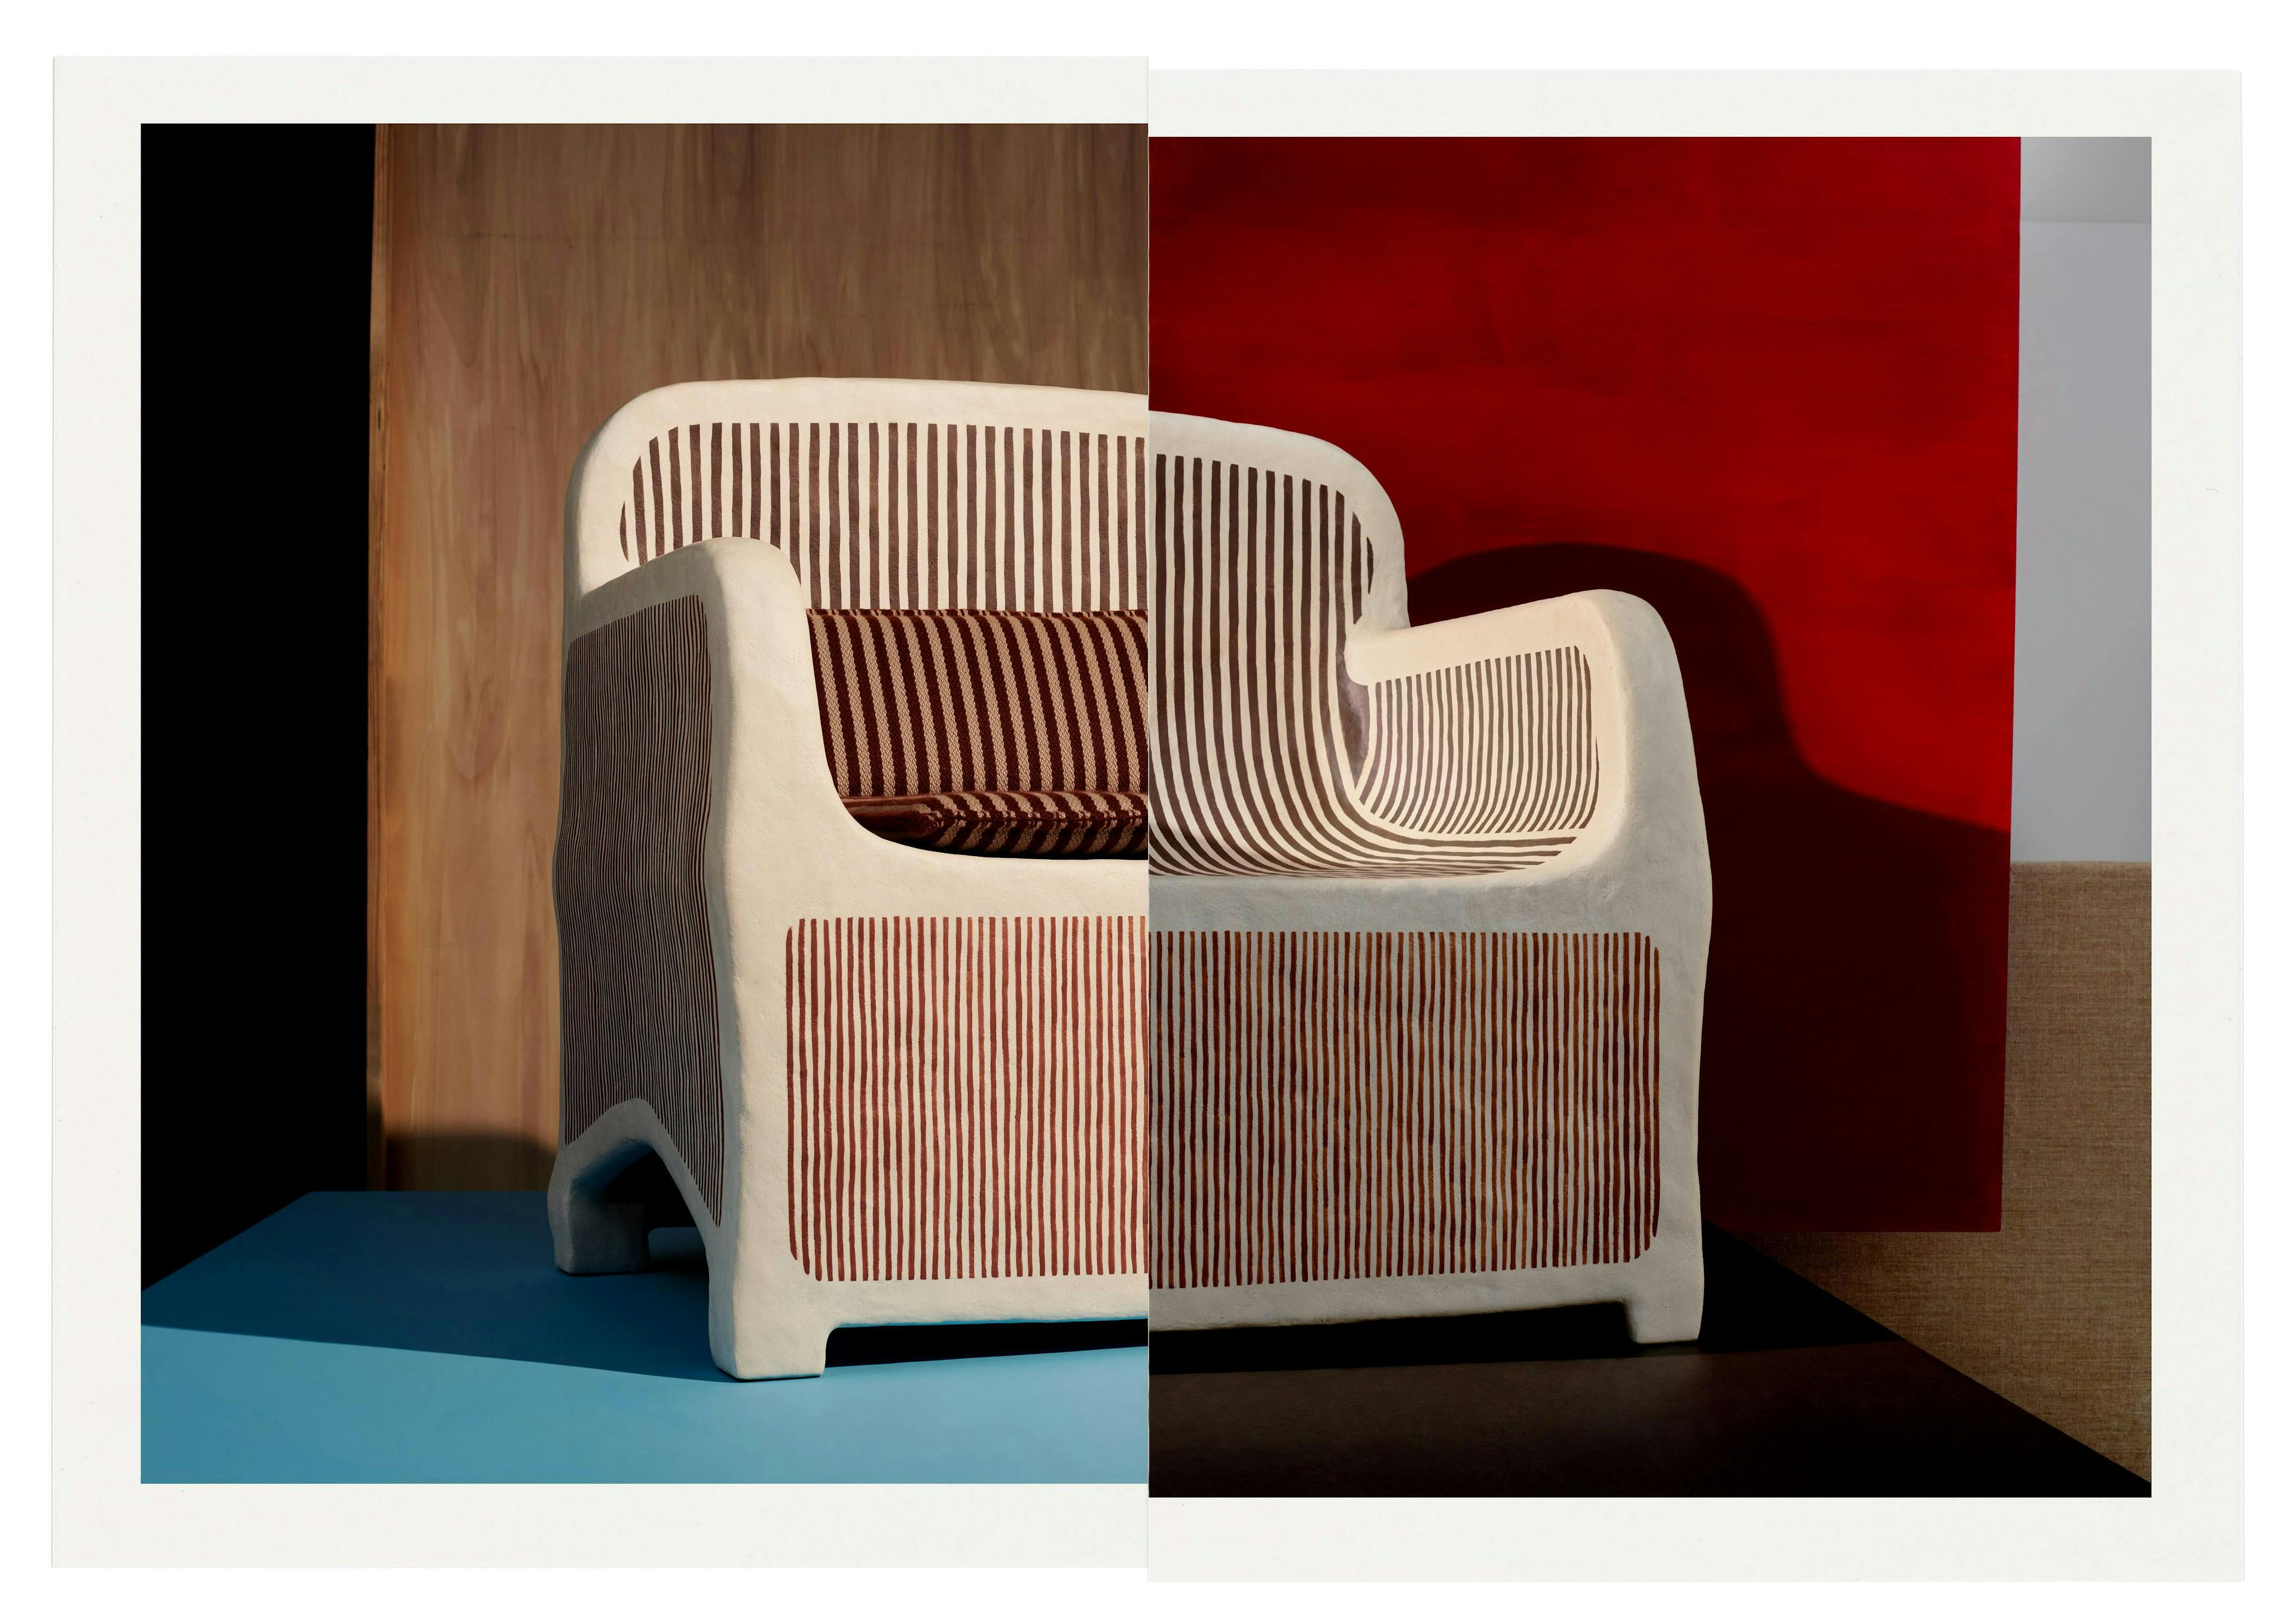 Nella foto Hemès "Collections for the home" Sillage d’Hermès Armchair